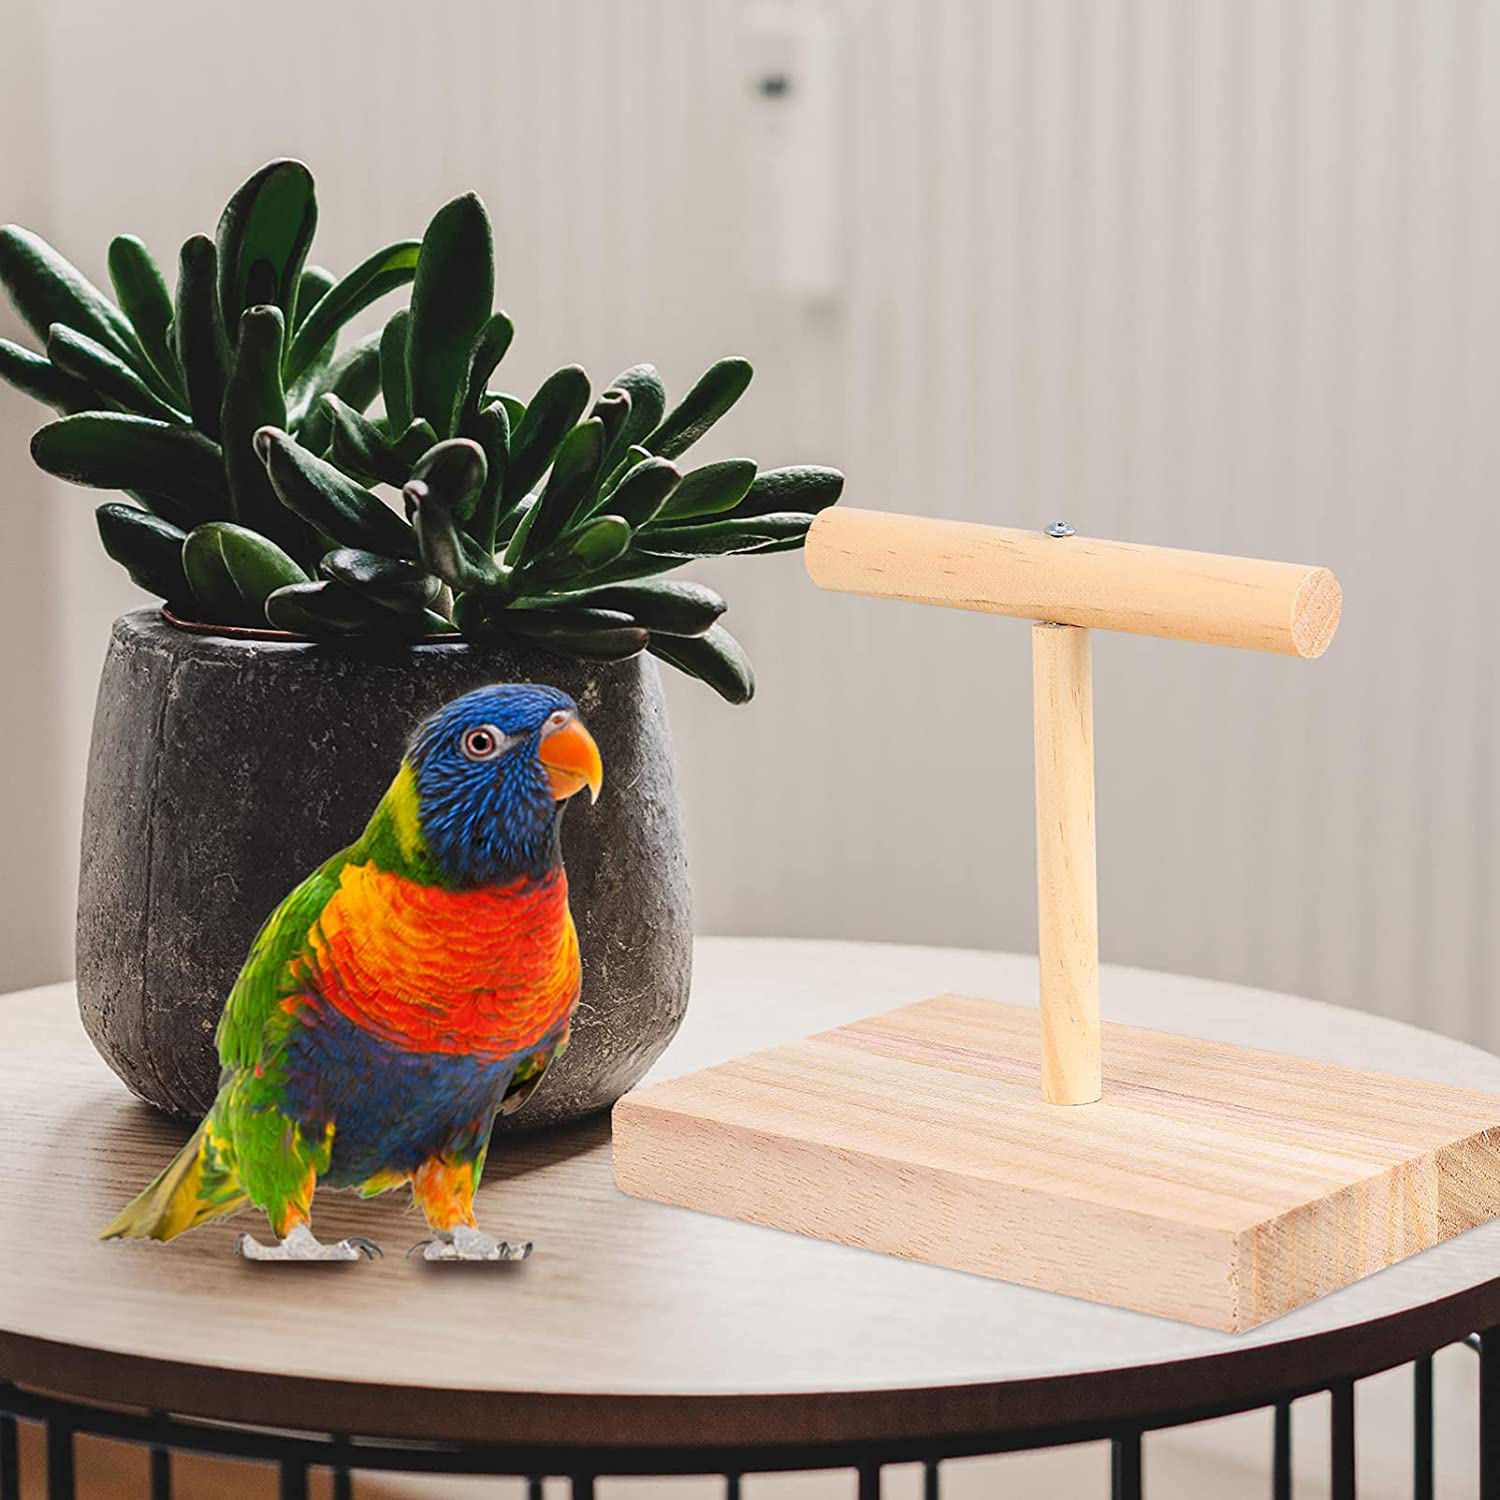 STOBOK 1Pc Bird Training Stand, Wooden Parrot Training T Stand Perch Bird Cage Stand Playstand Playgound Play Gym for Concures Parakeets Lovebirds Cockatiels